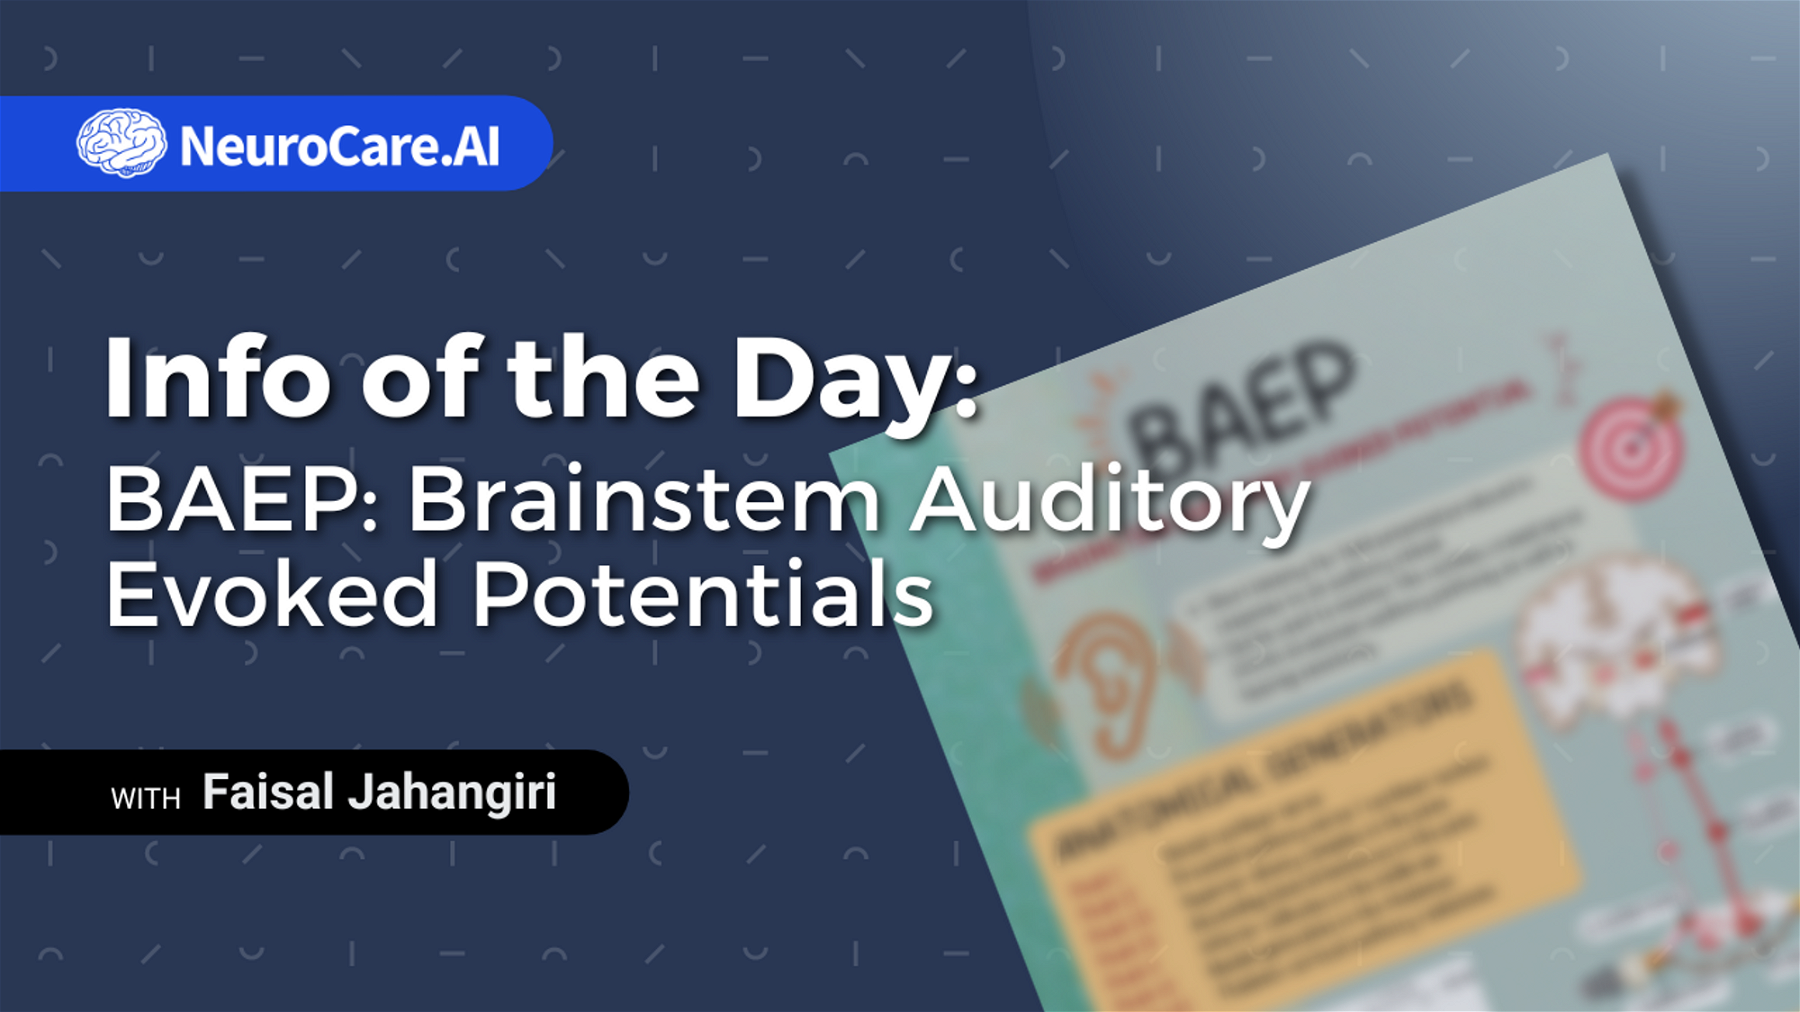 Info of the Day: "BAEP: Brainstem Auditory Evoked Potentials"